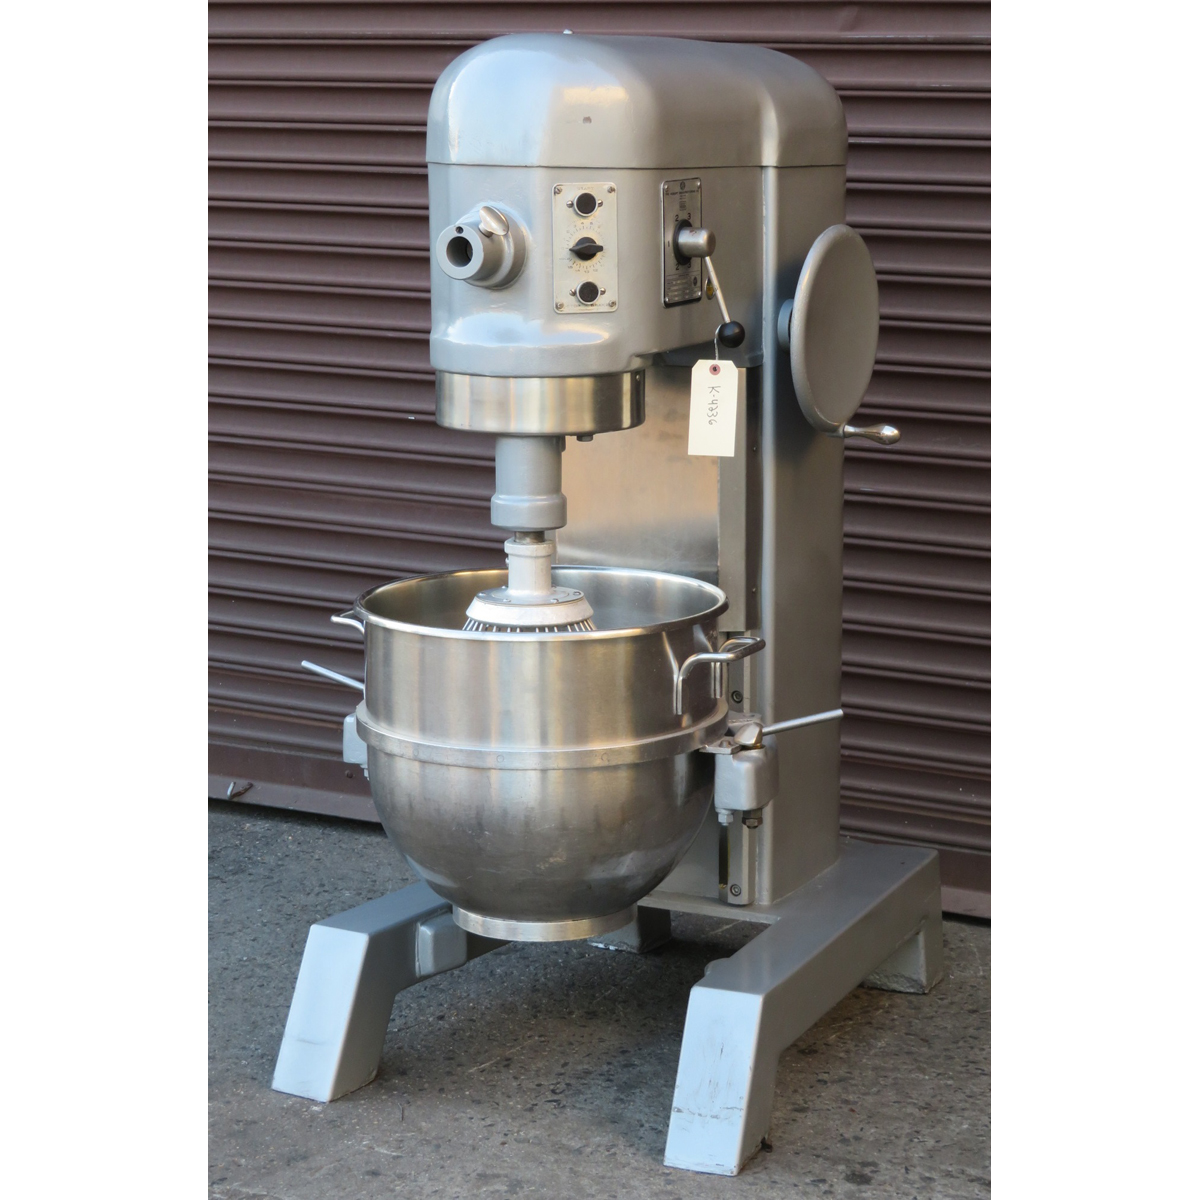 Hobart 60 Quart H600T Mixer, Used Great Condition